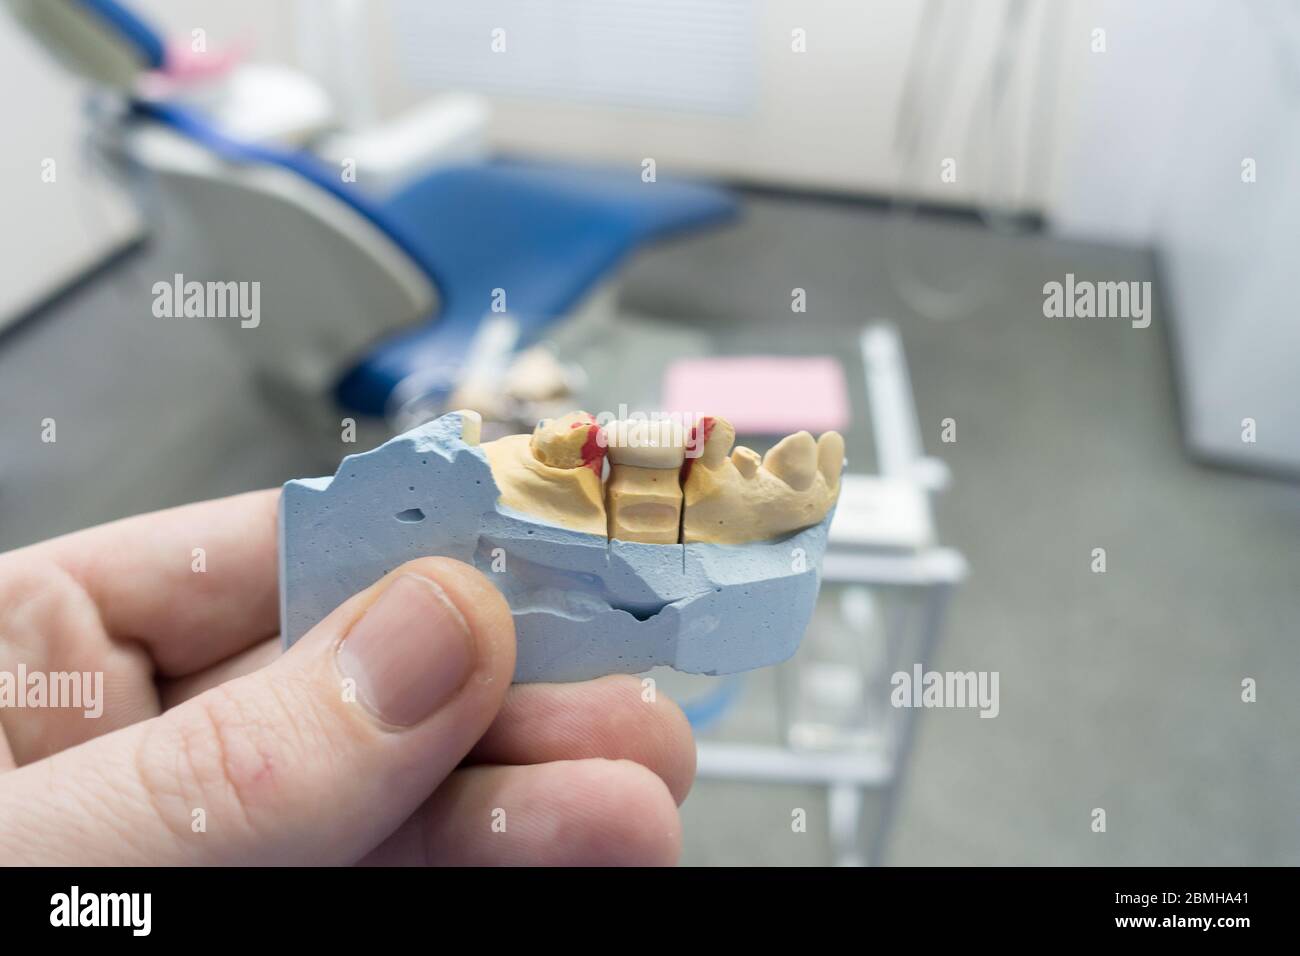 dental ceramic-metal crowns on a plaster model in the doctor’s hands Stock Photo